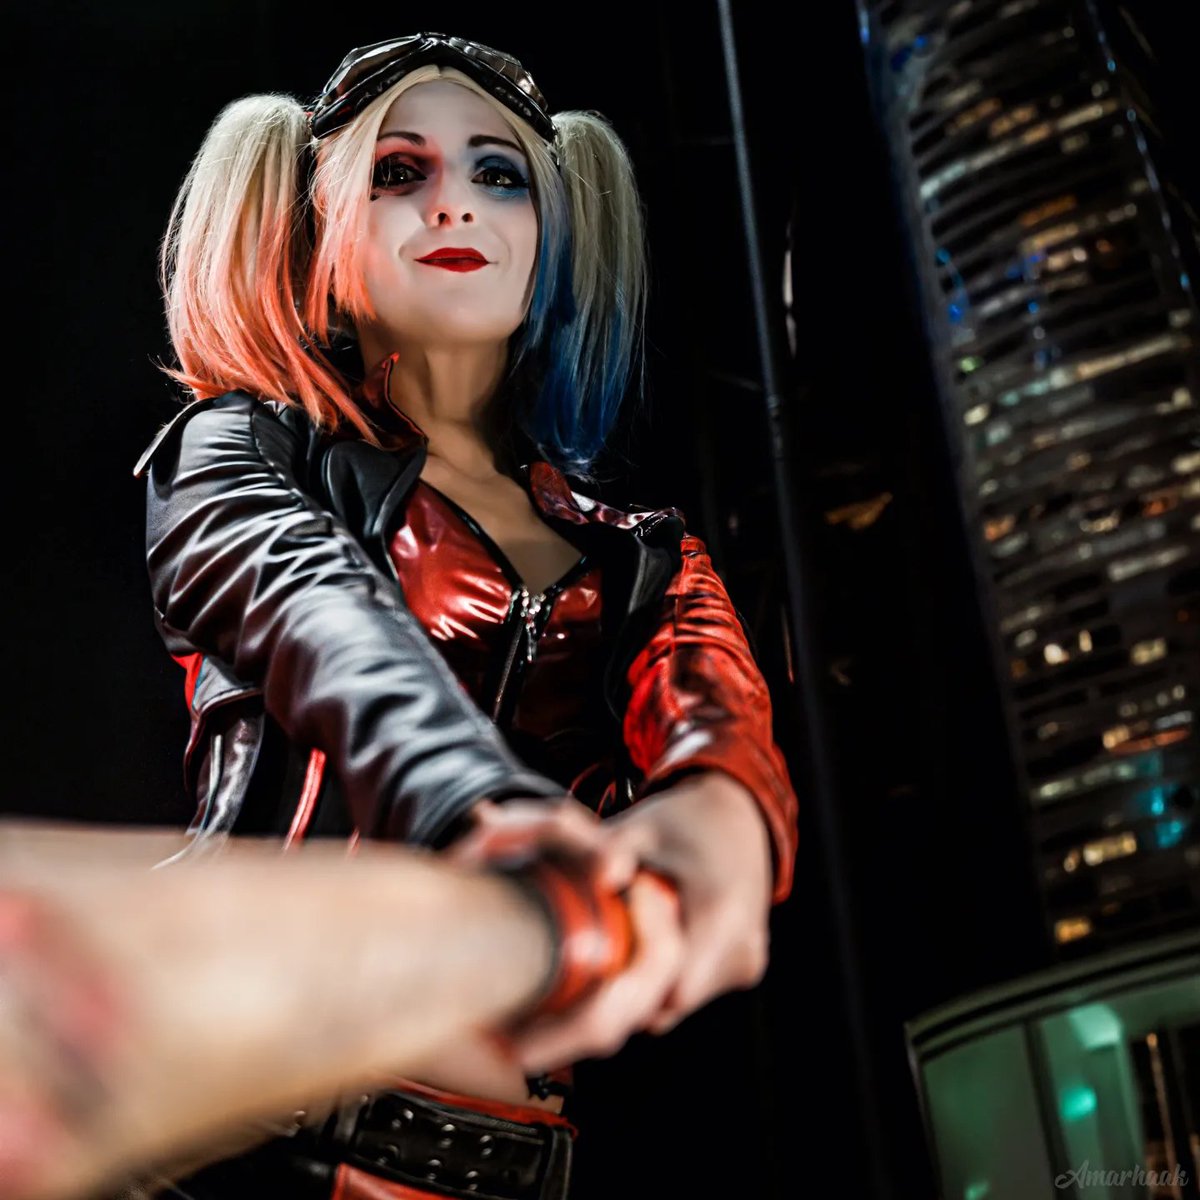 Harley Quinn by Sikay Cosplay instagram.com/sikay_cosplay/
Photo by Amarhaak instagram.com/amarhaak_/

#HarleyQuinn #HarleyQuinnCosplay #DC #DCComics #DCCosplay #Cosplay